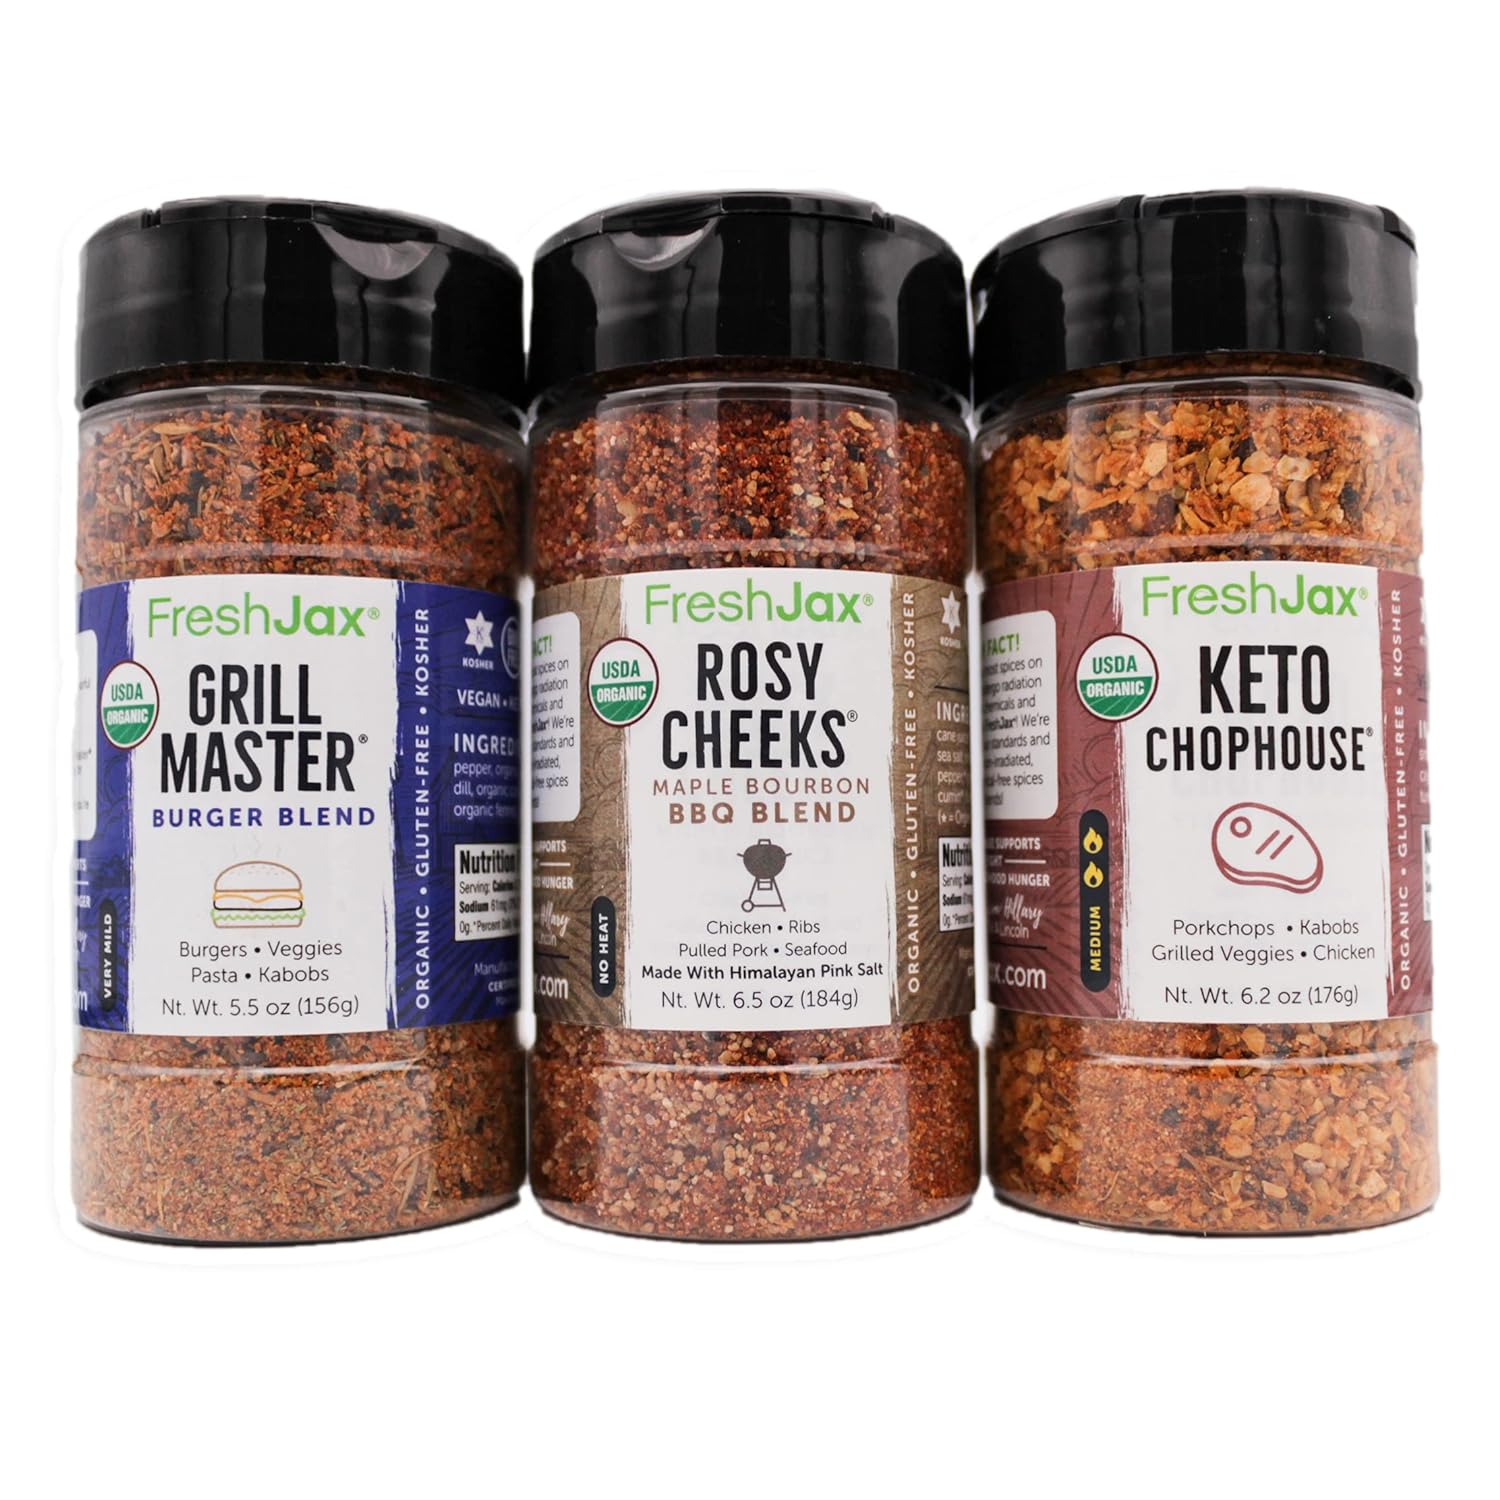 FreshJax Grill and BBQ Seasoning Gift Set | Pack of 3 Large Organic Grilling Spices | Grilling Gift sets for Men | Grill Master, Keto Chophouse & Rosy Cheeks-Maple Bourbon | Spices and Seasoning Sets